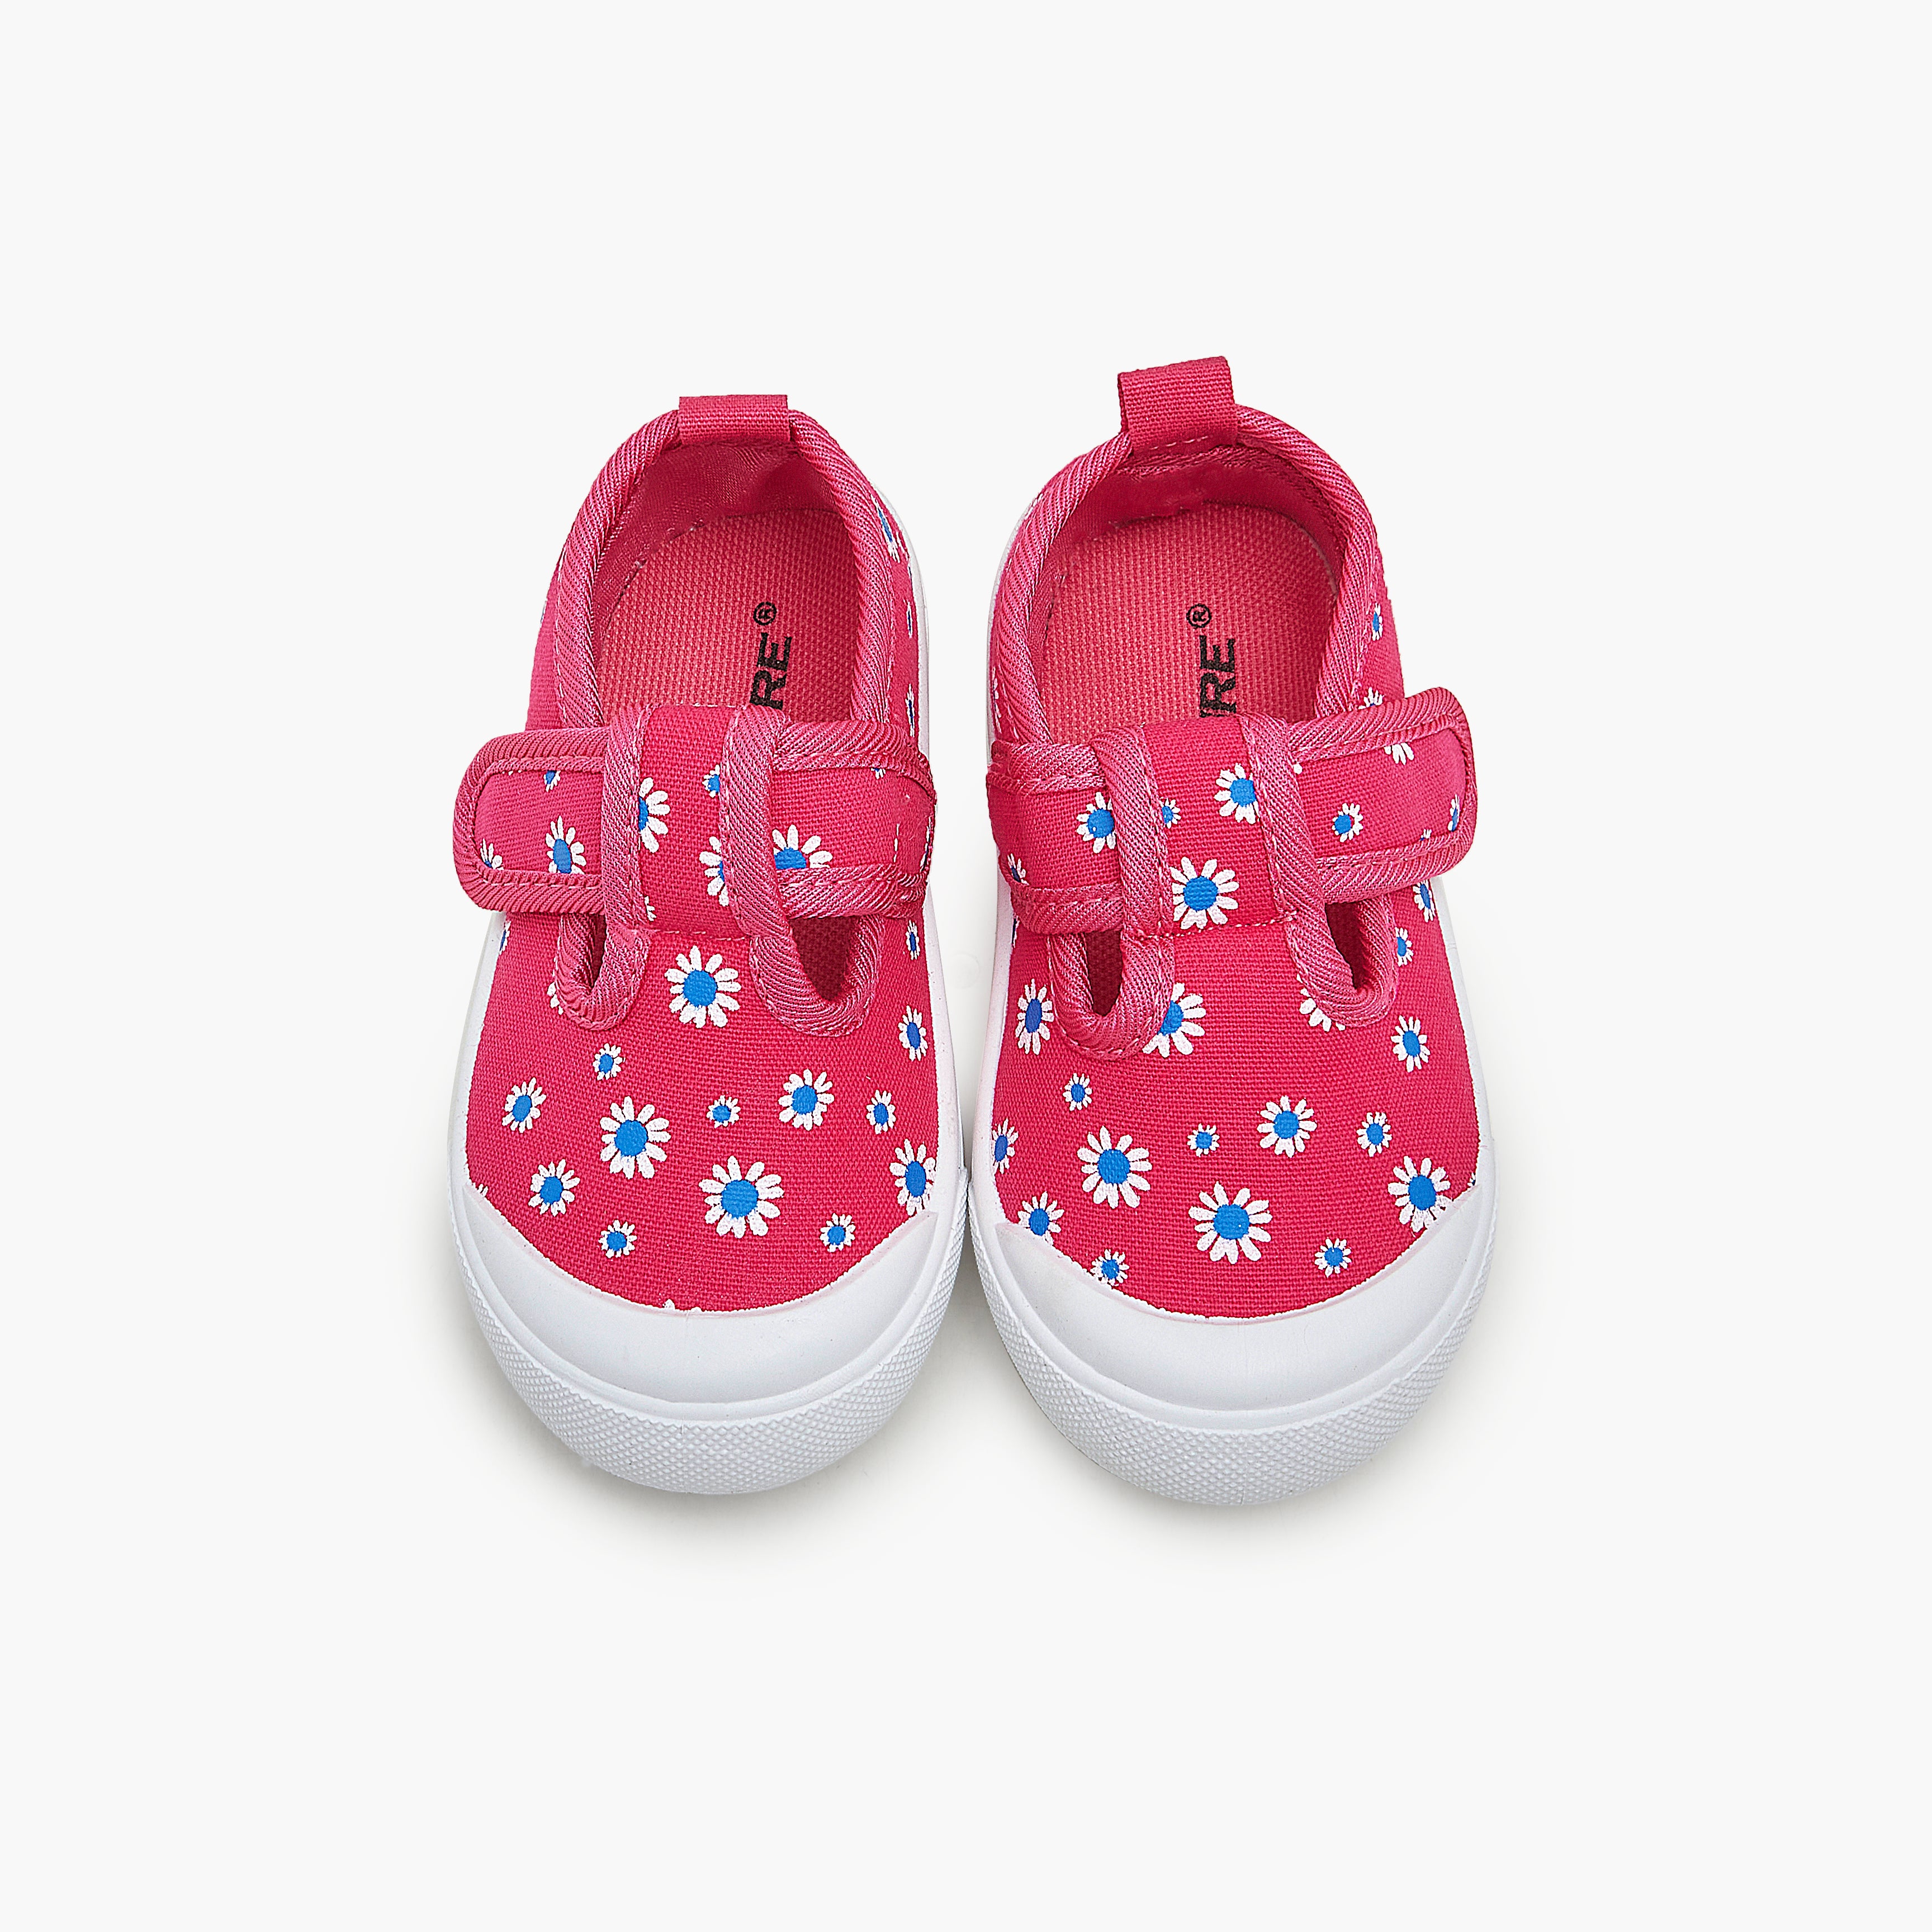 Infant Shoes with Flowers